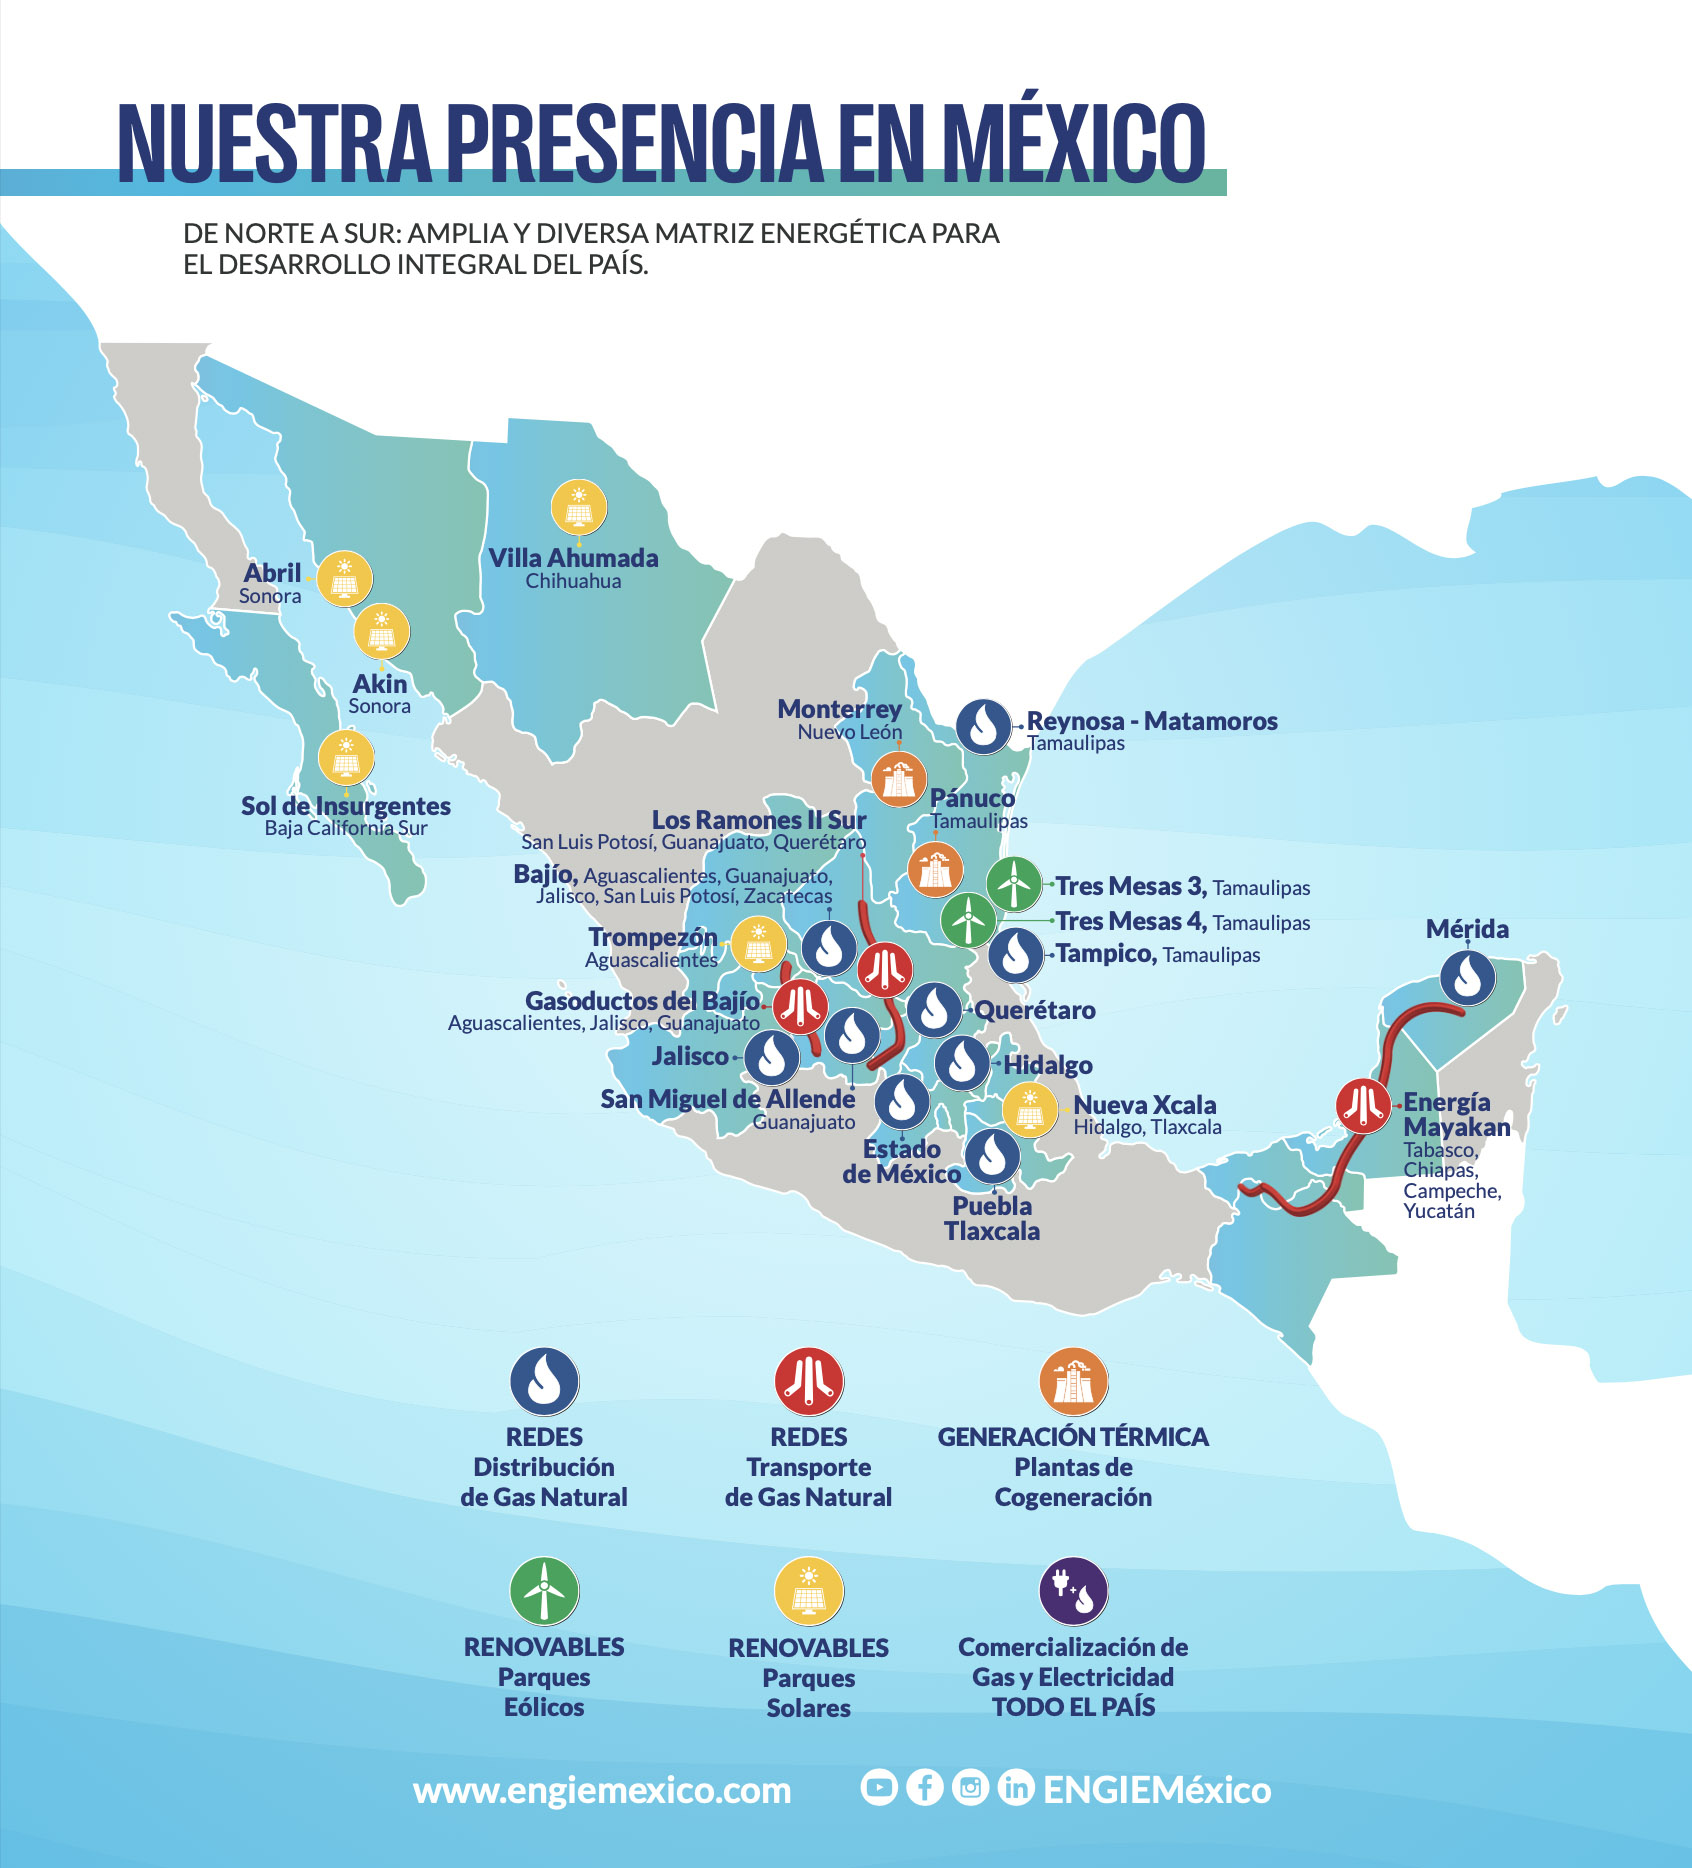 engie-mexico-2